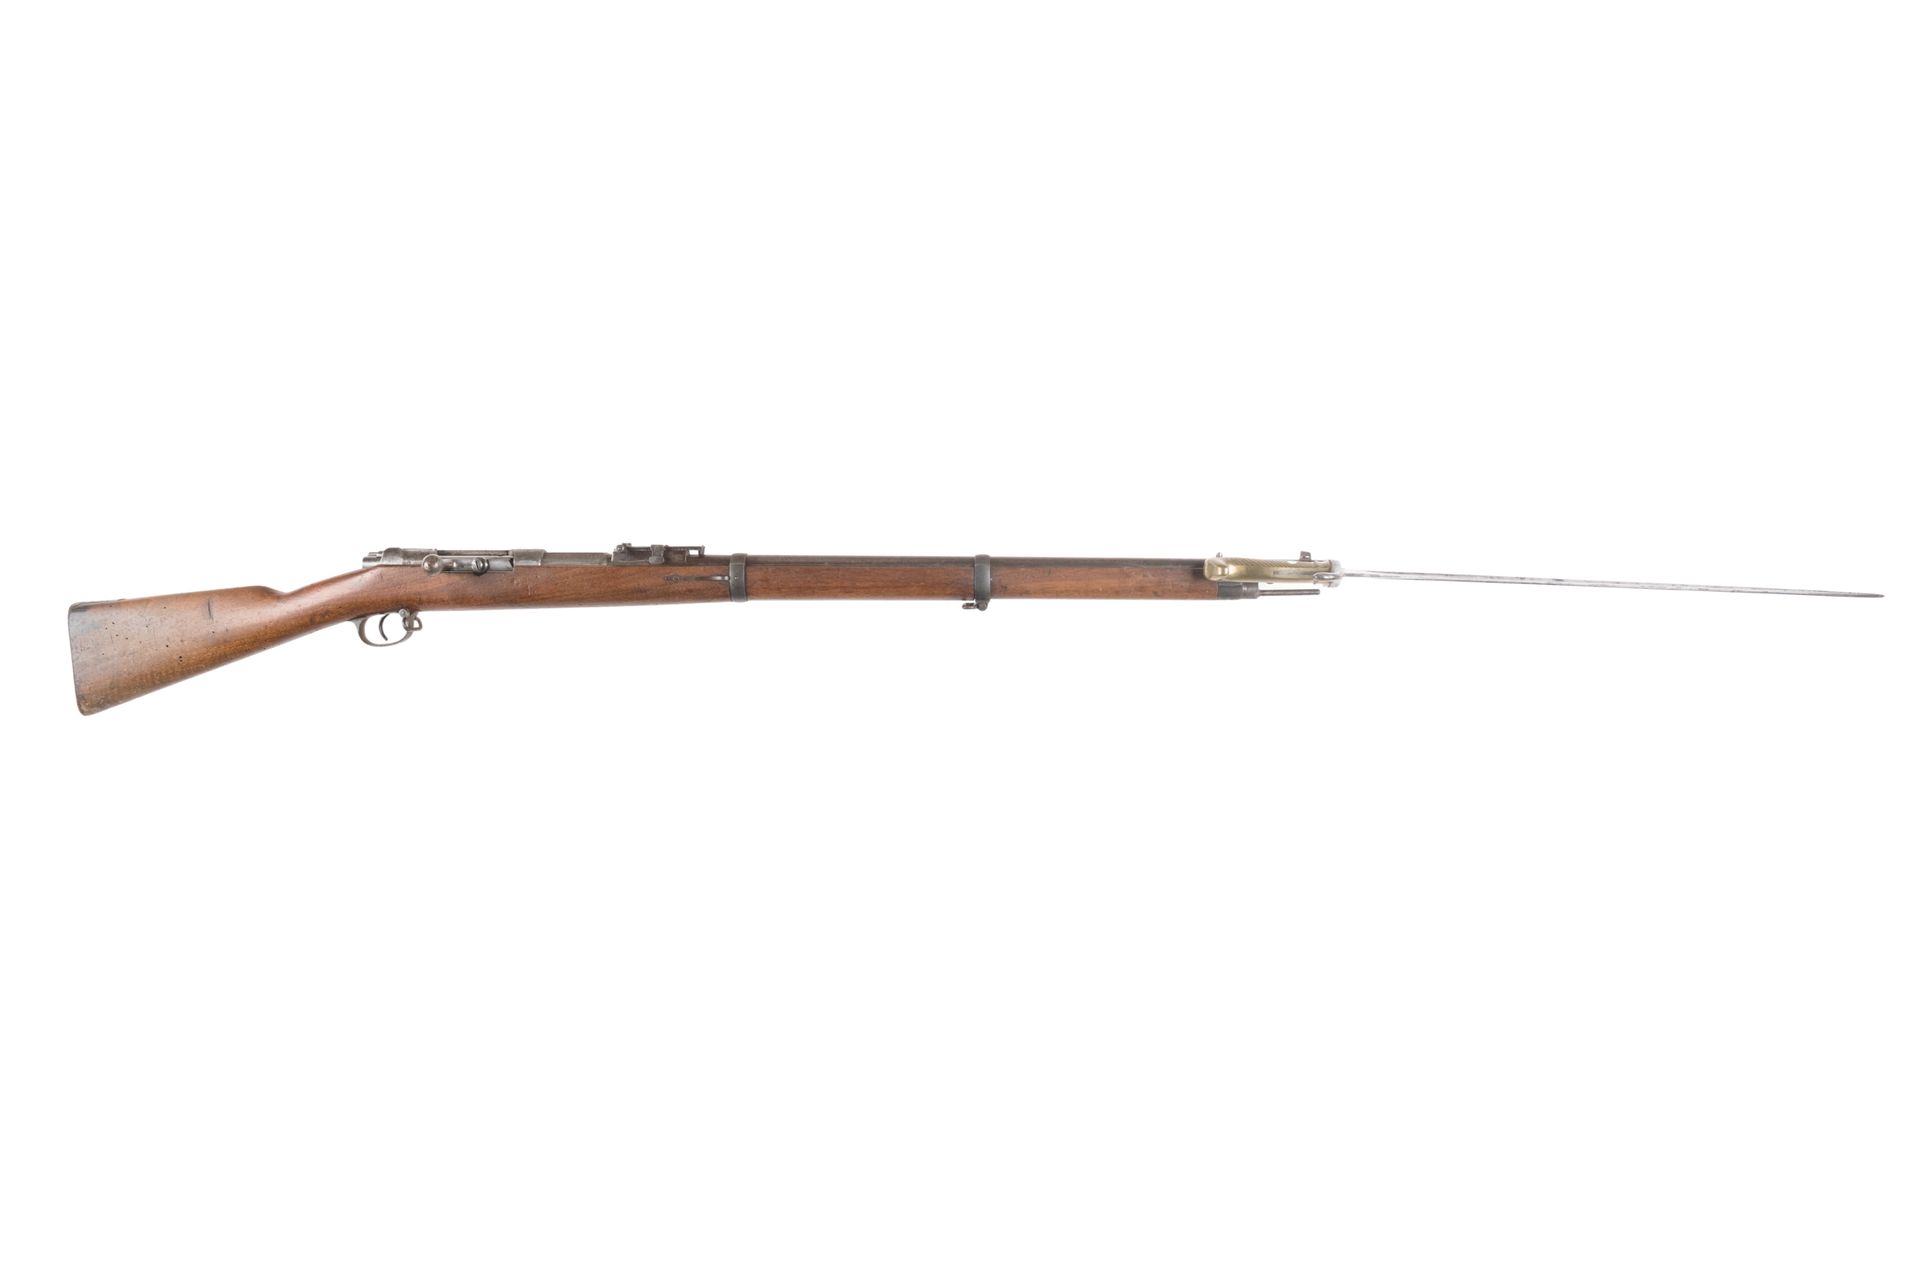 Null Rifle of rifle Mauser 1871-84, gauge 11 mm. 

Round barrel, with frog, stam&hellip;